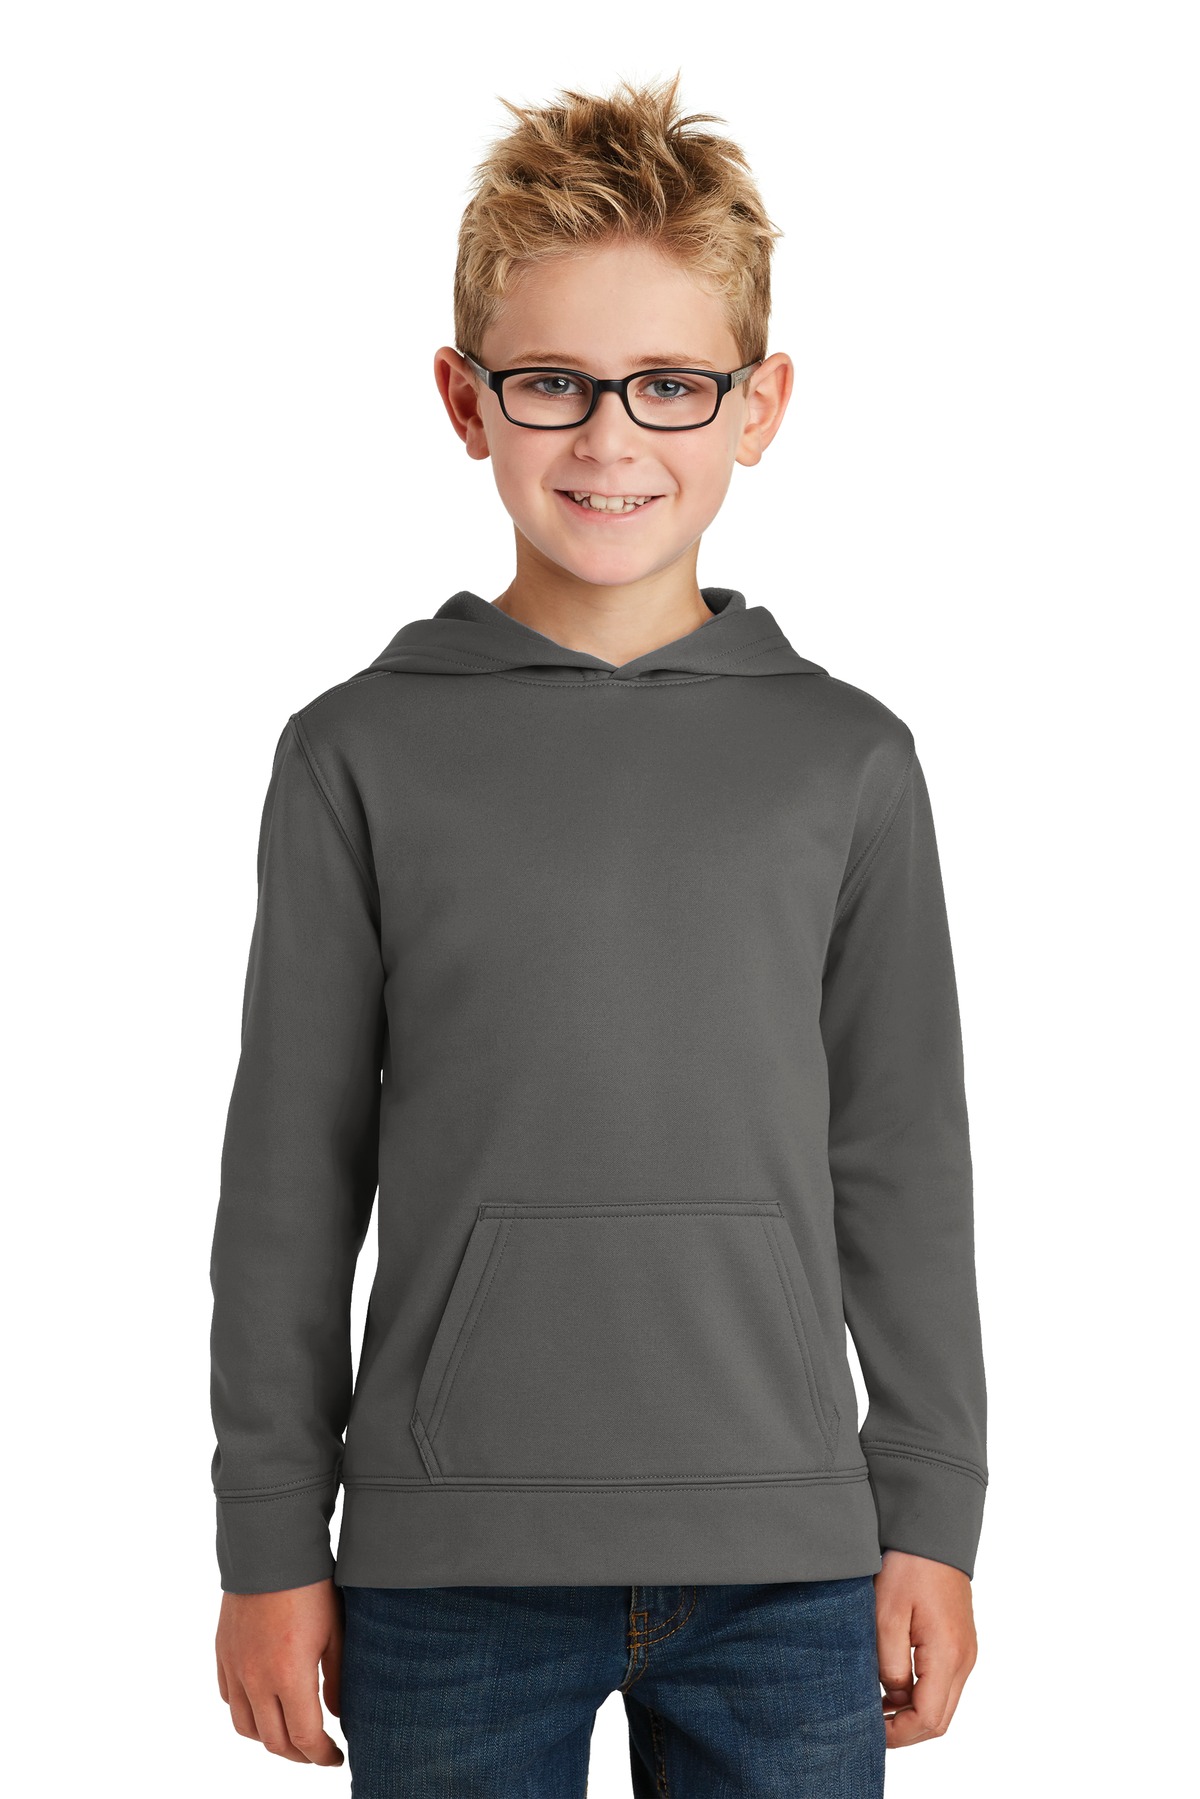 Port & Company Youth Performance Fleece Pullover Hooded...